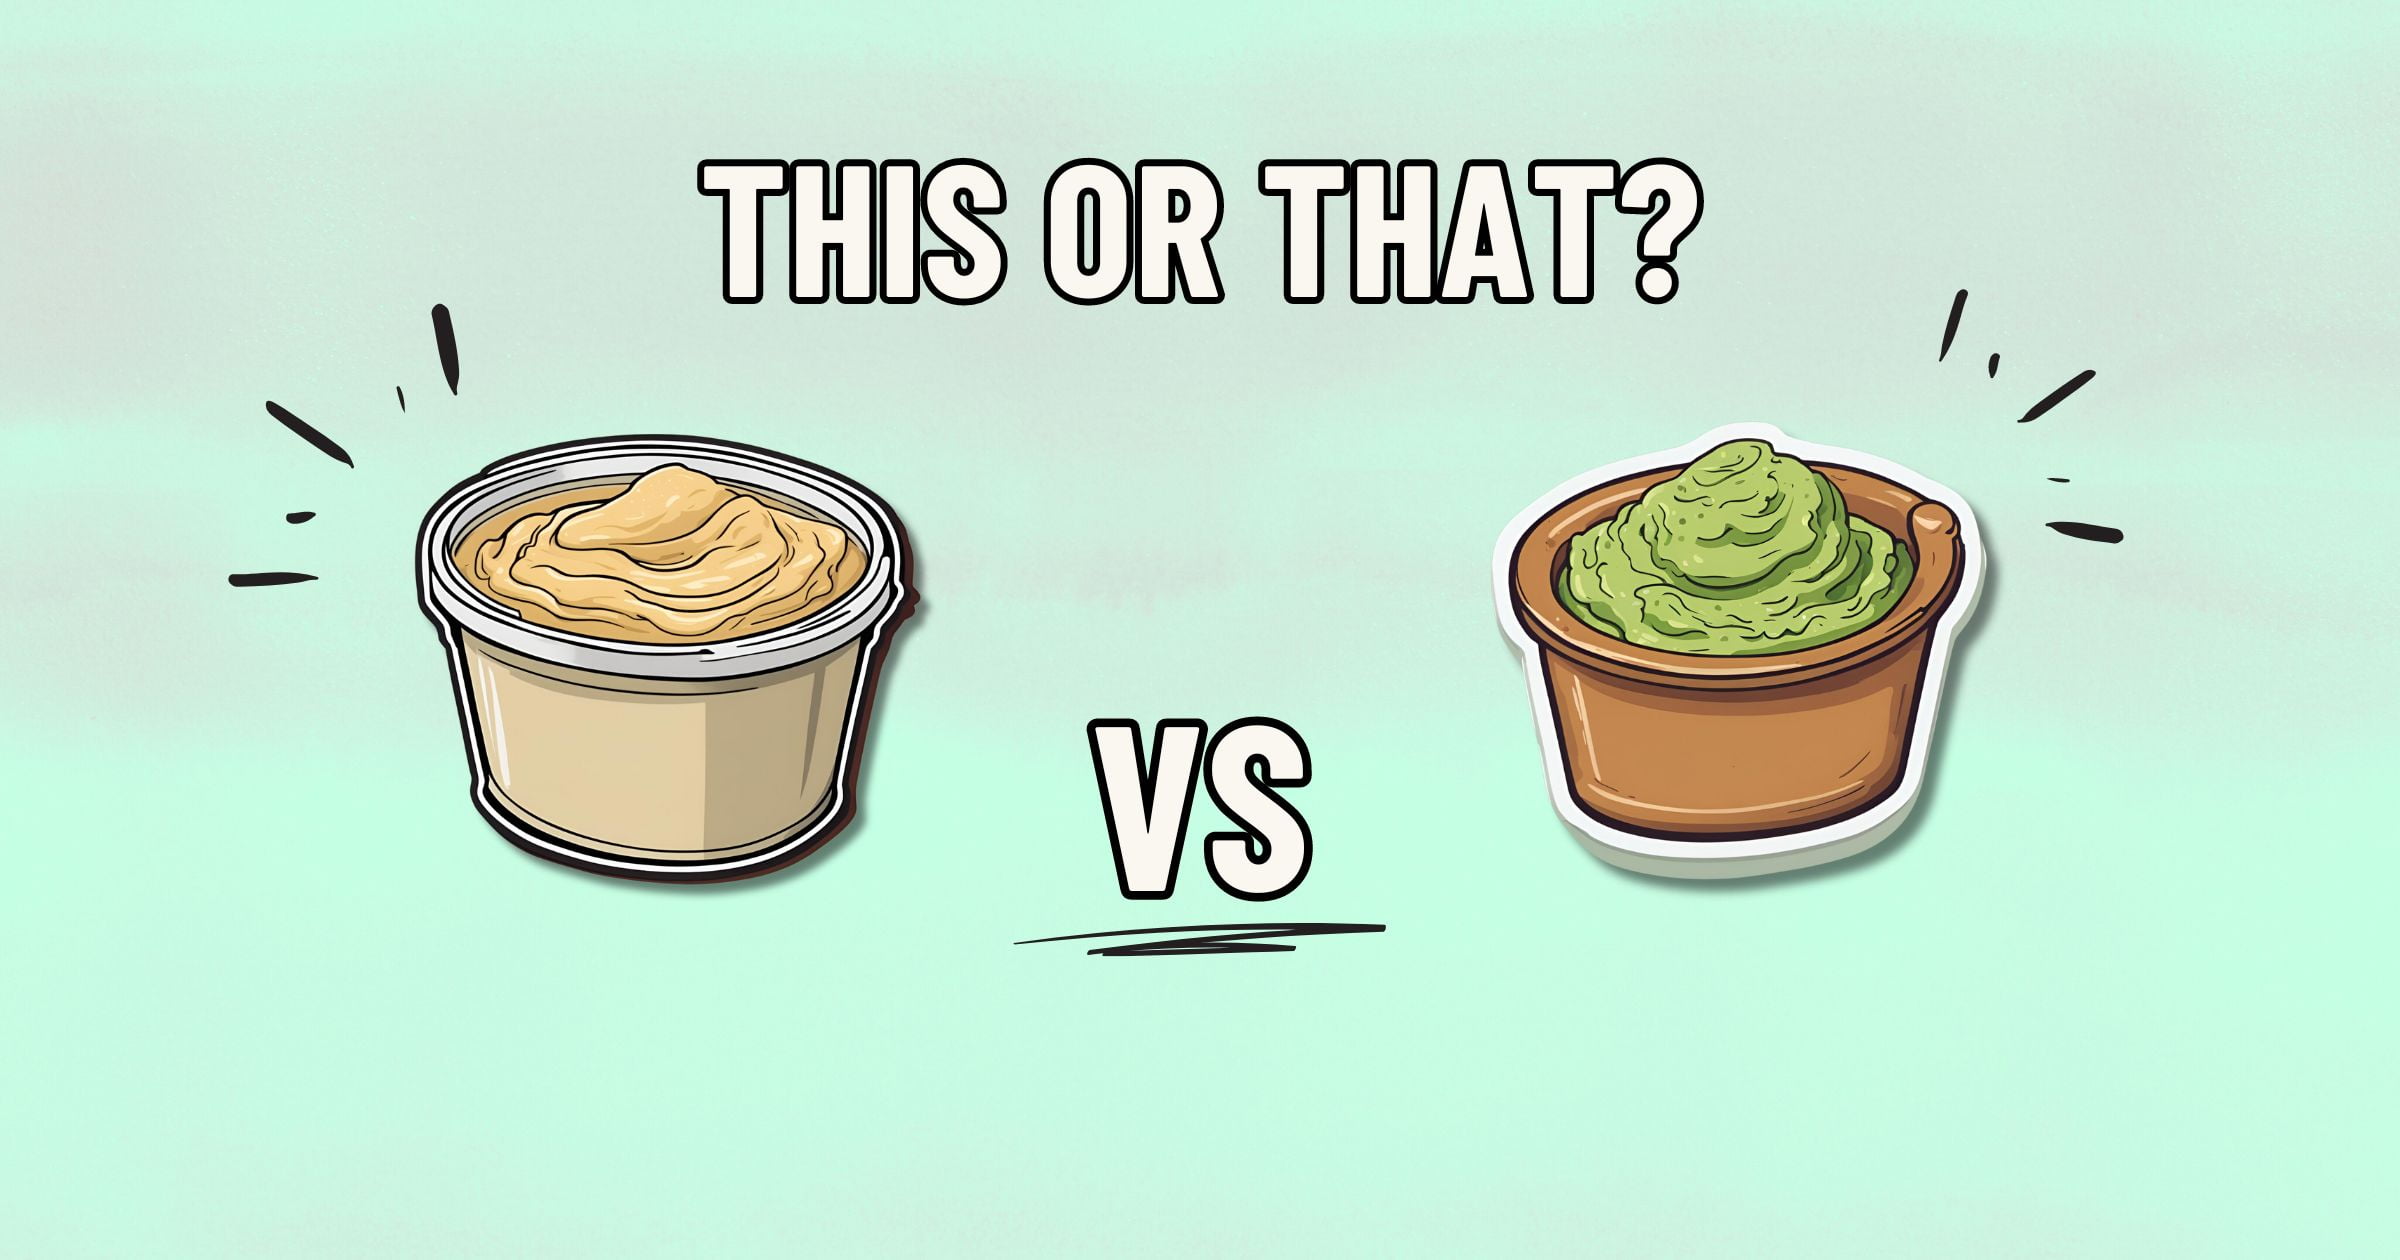 Illustrated image with two containers of food against a light green background. The left container holds a beige-colored spread, likely hummus, while the right container holds green guacamole. Text above reads "THIS OR THAT?" with "VS" between the containers.